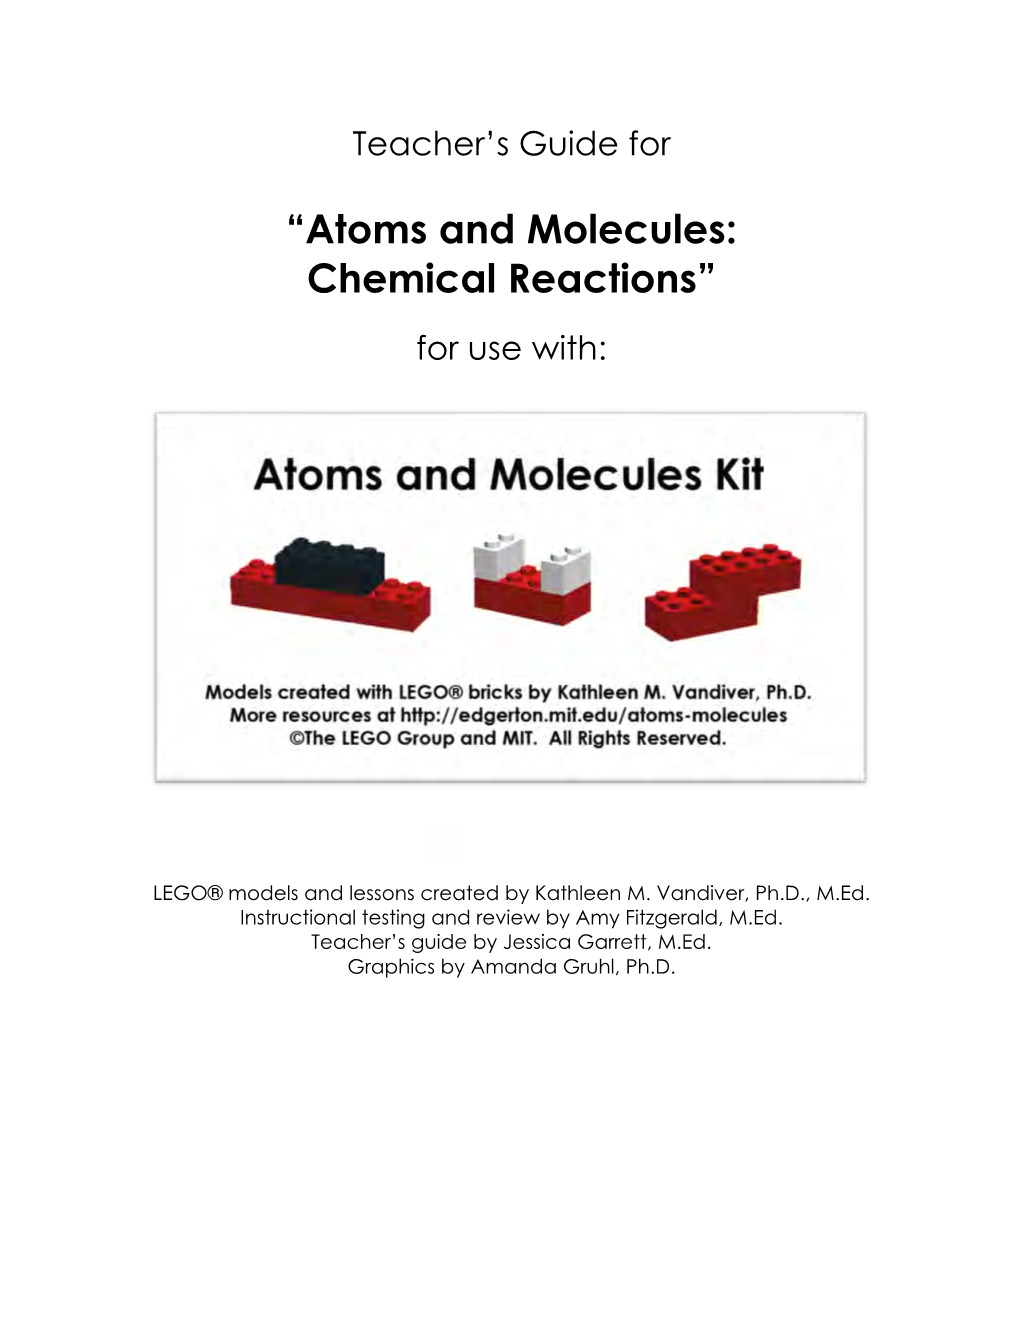 “Atoms and Molecules: Chemical Reactions”